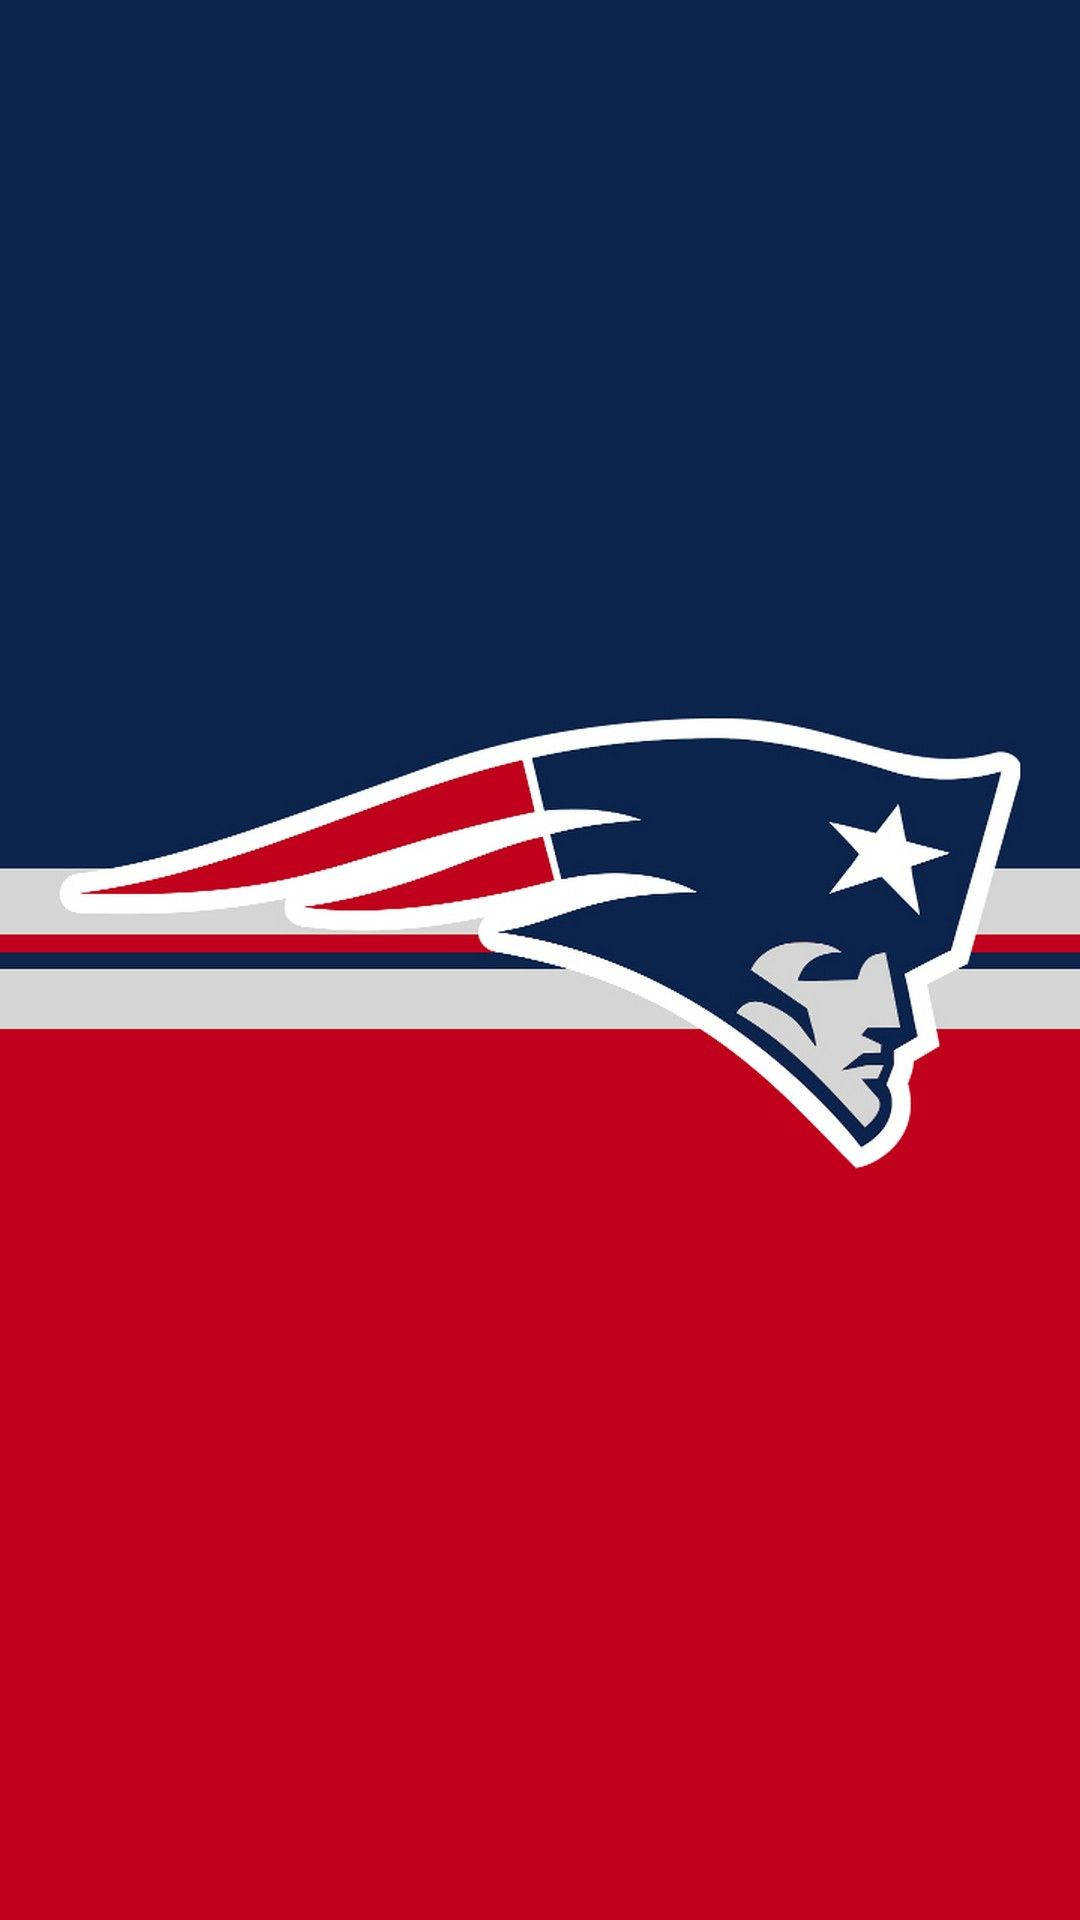 Celebrate Your Patriotism with Awesome Patriots Wallpaper